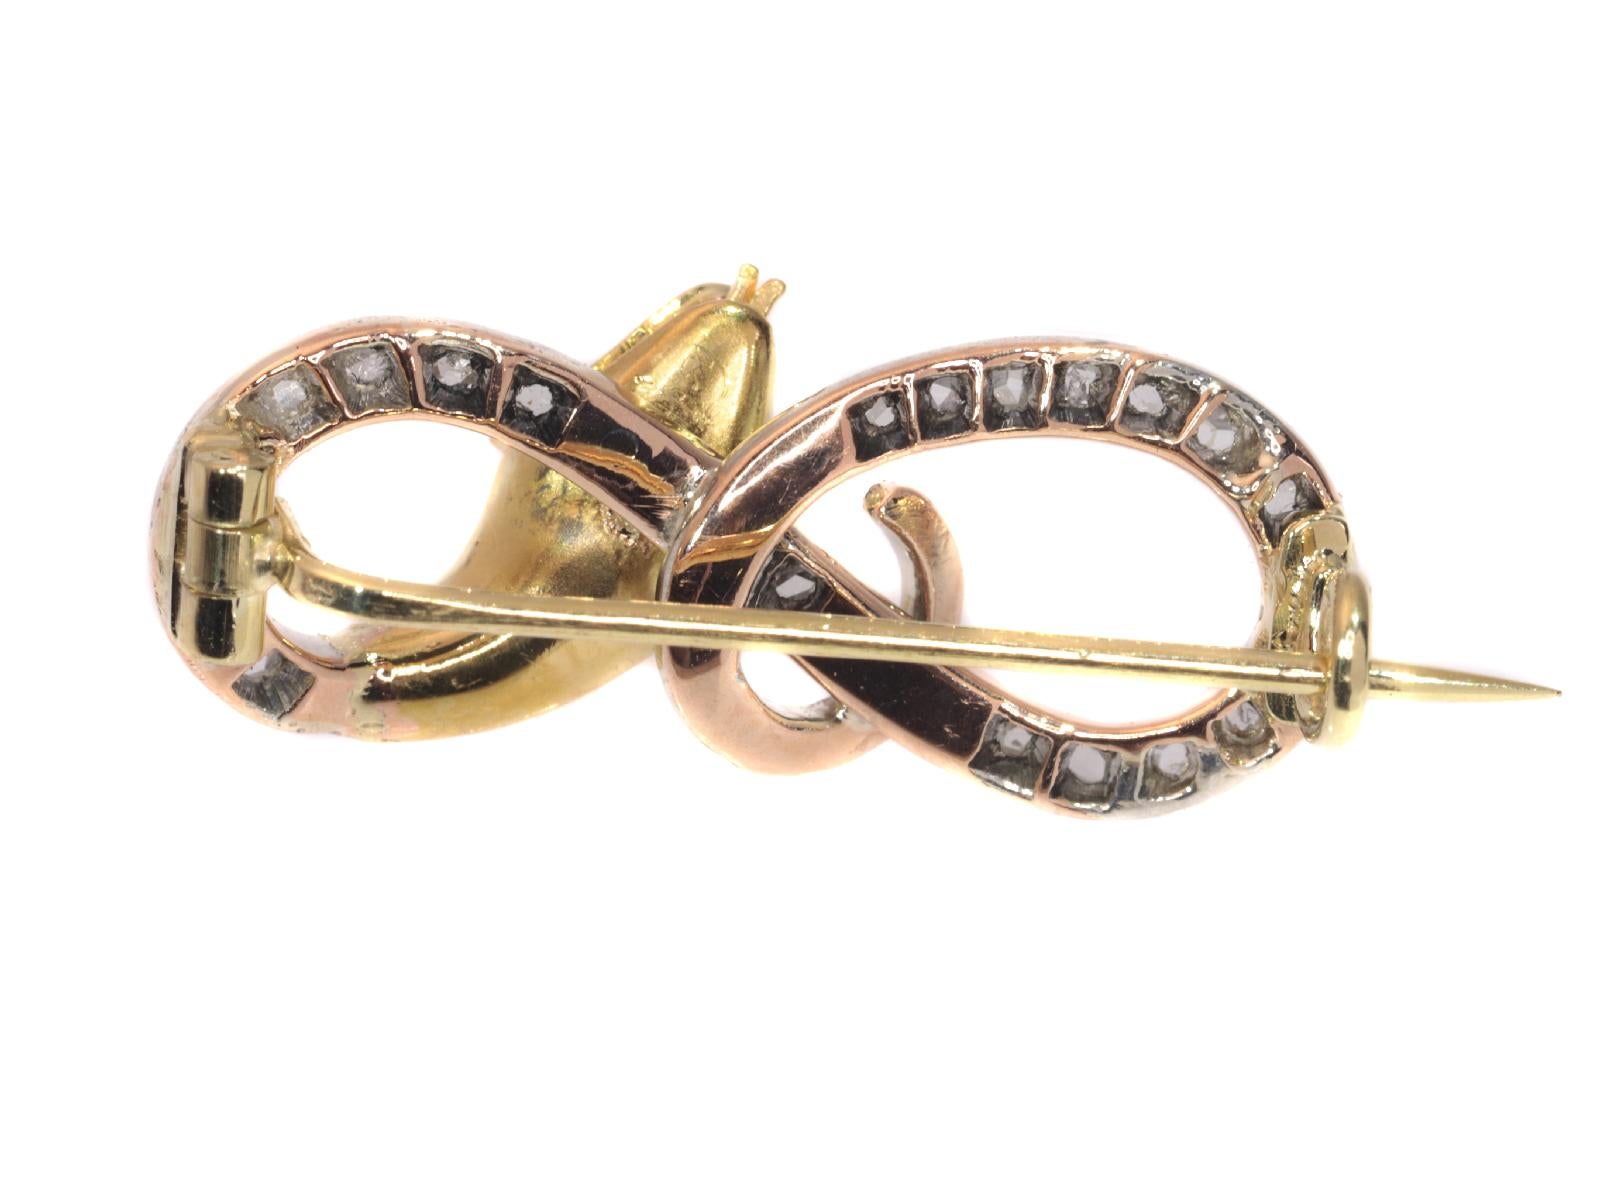 Victorian Gold Serpent Pin Set with Diamonds Curled Snake Brooch, 1900s For Sale 8